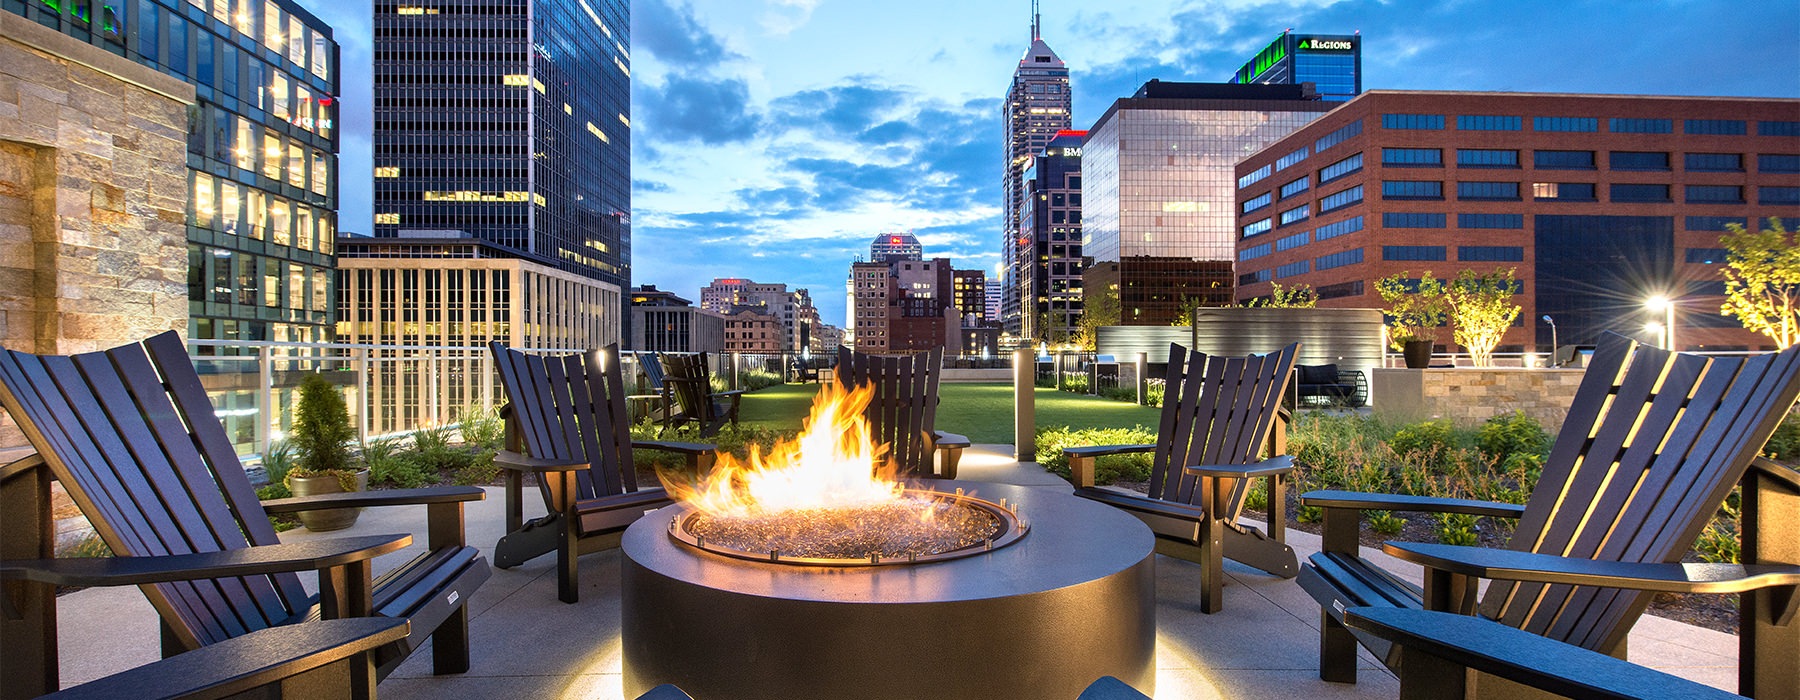 Outdoor Living with fire pit